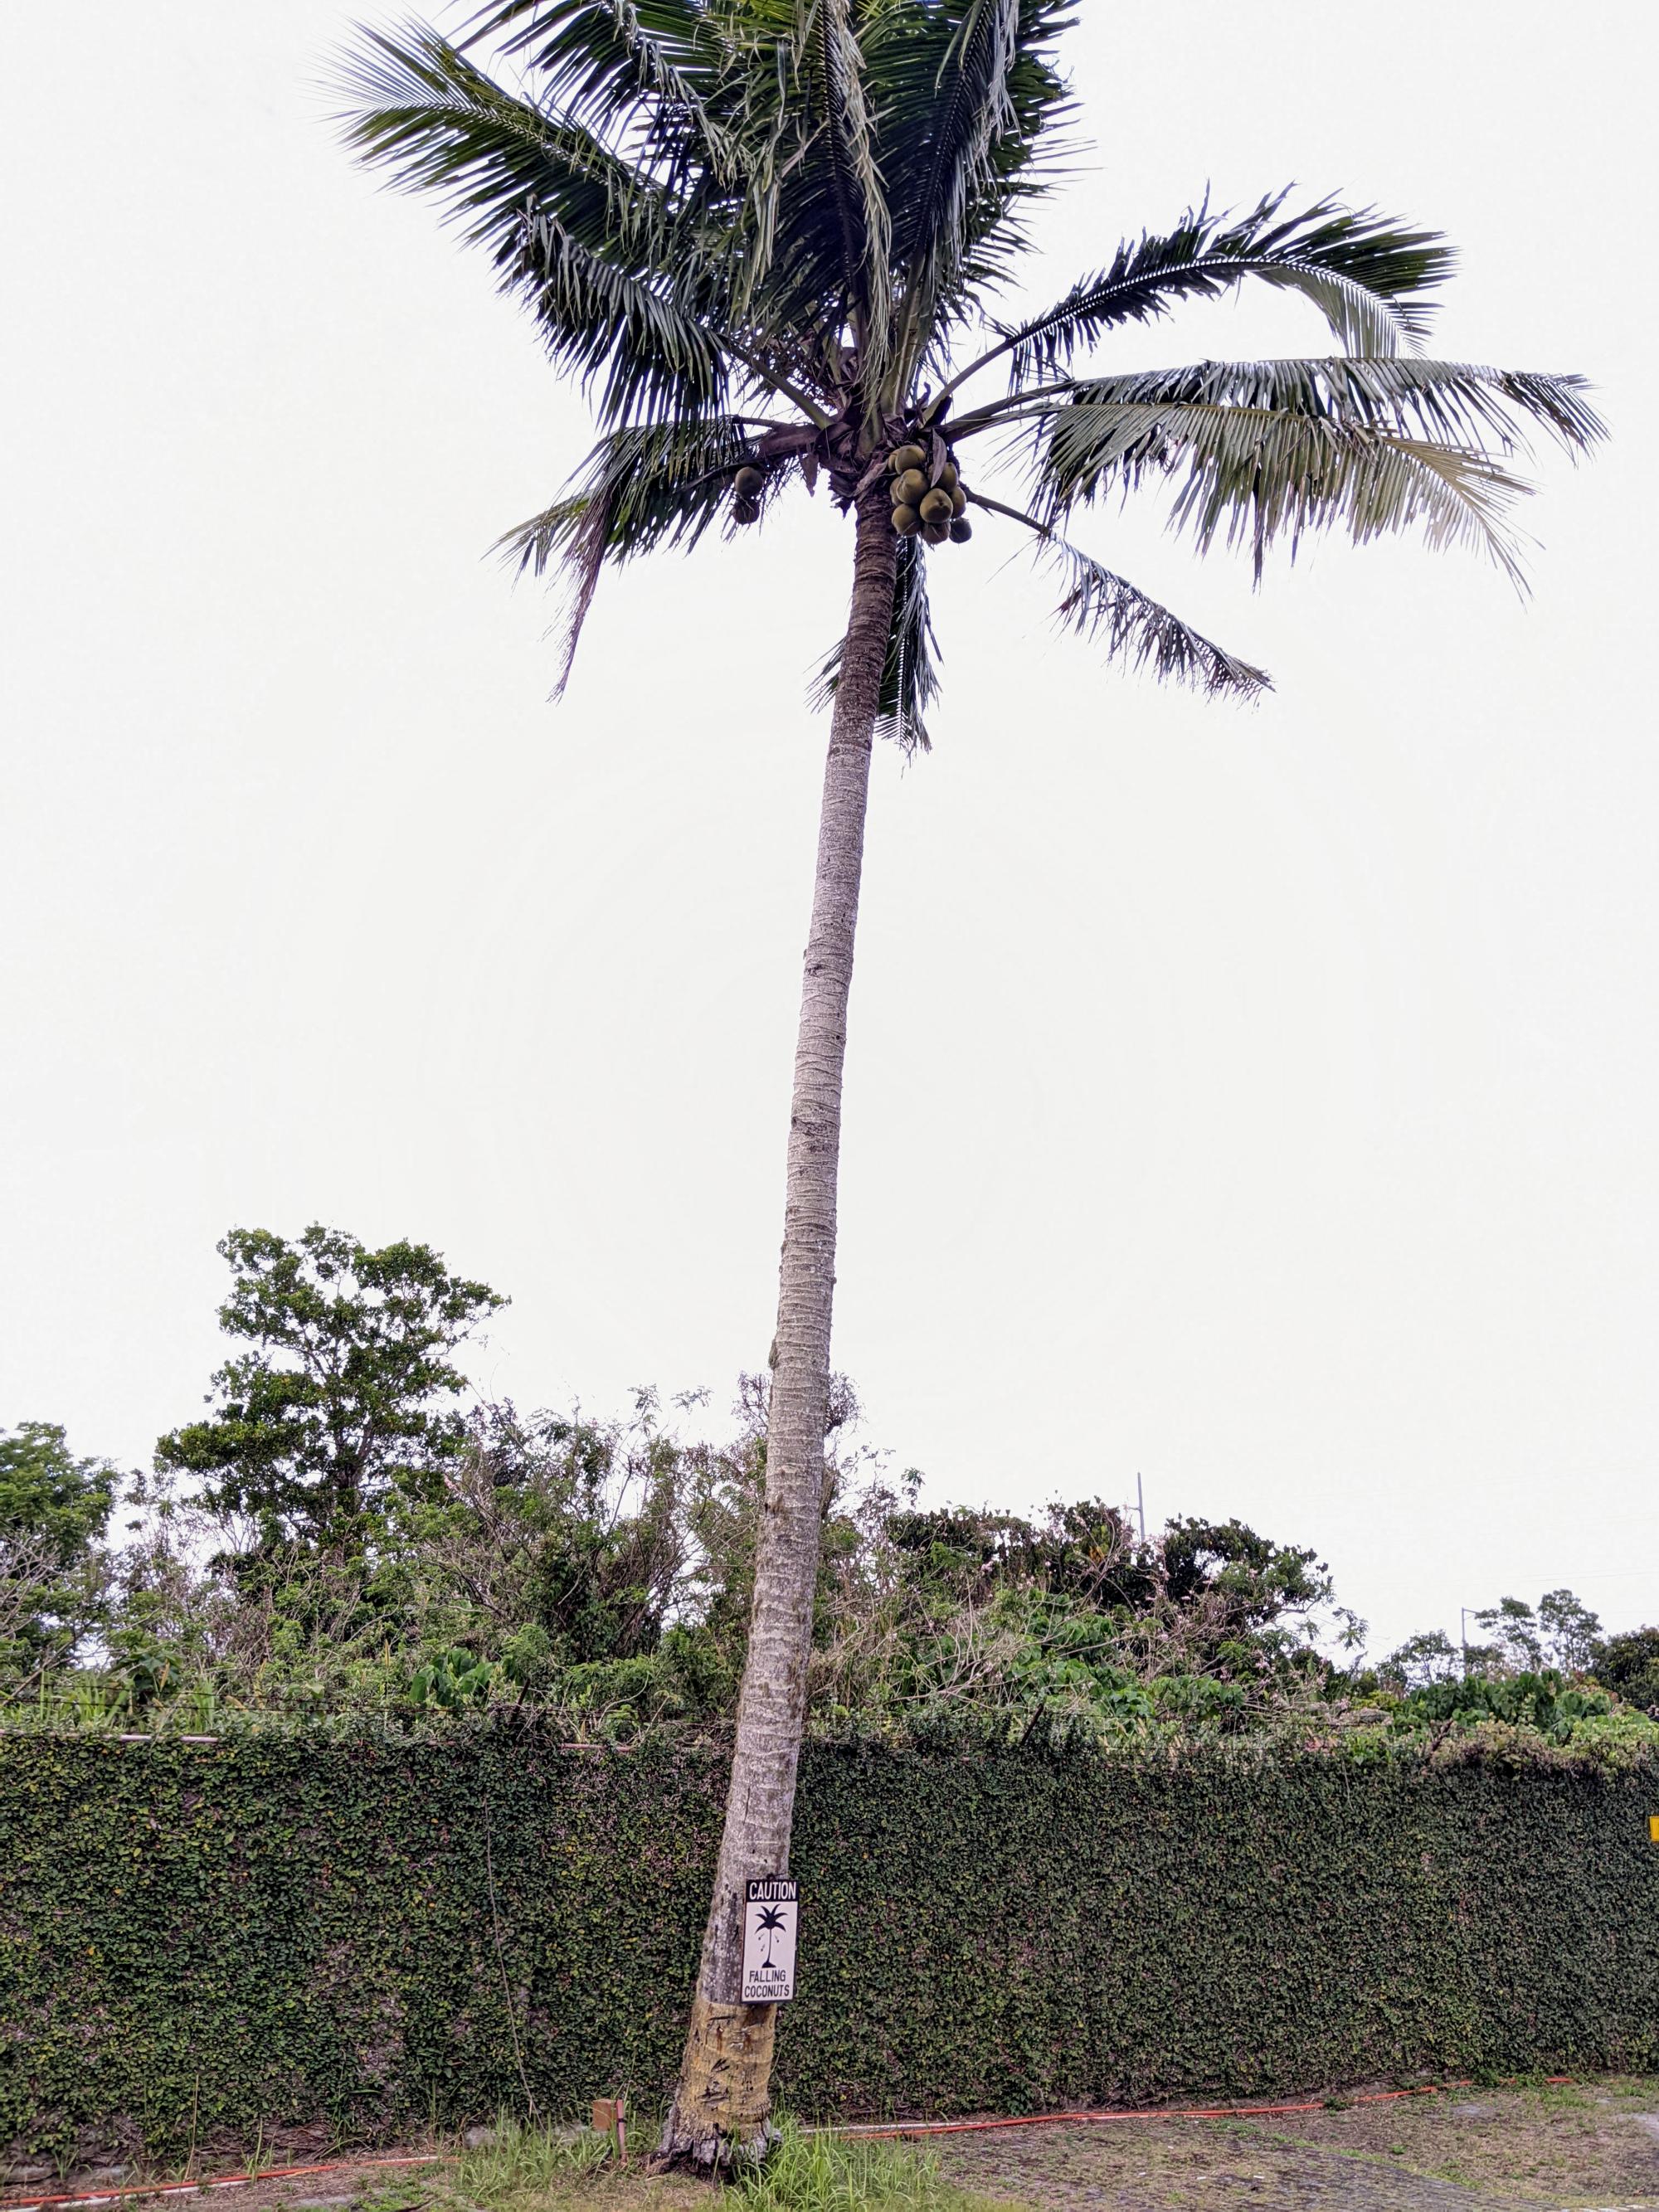 Signs of the Philippines - Falling Coconuts #2